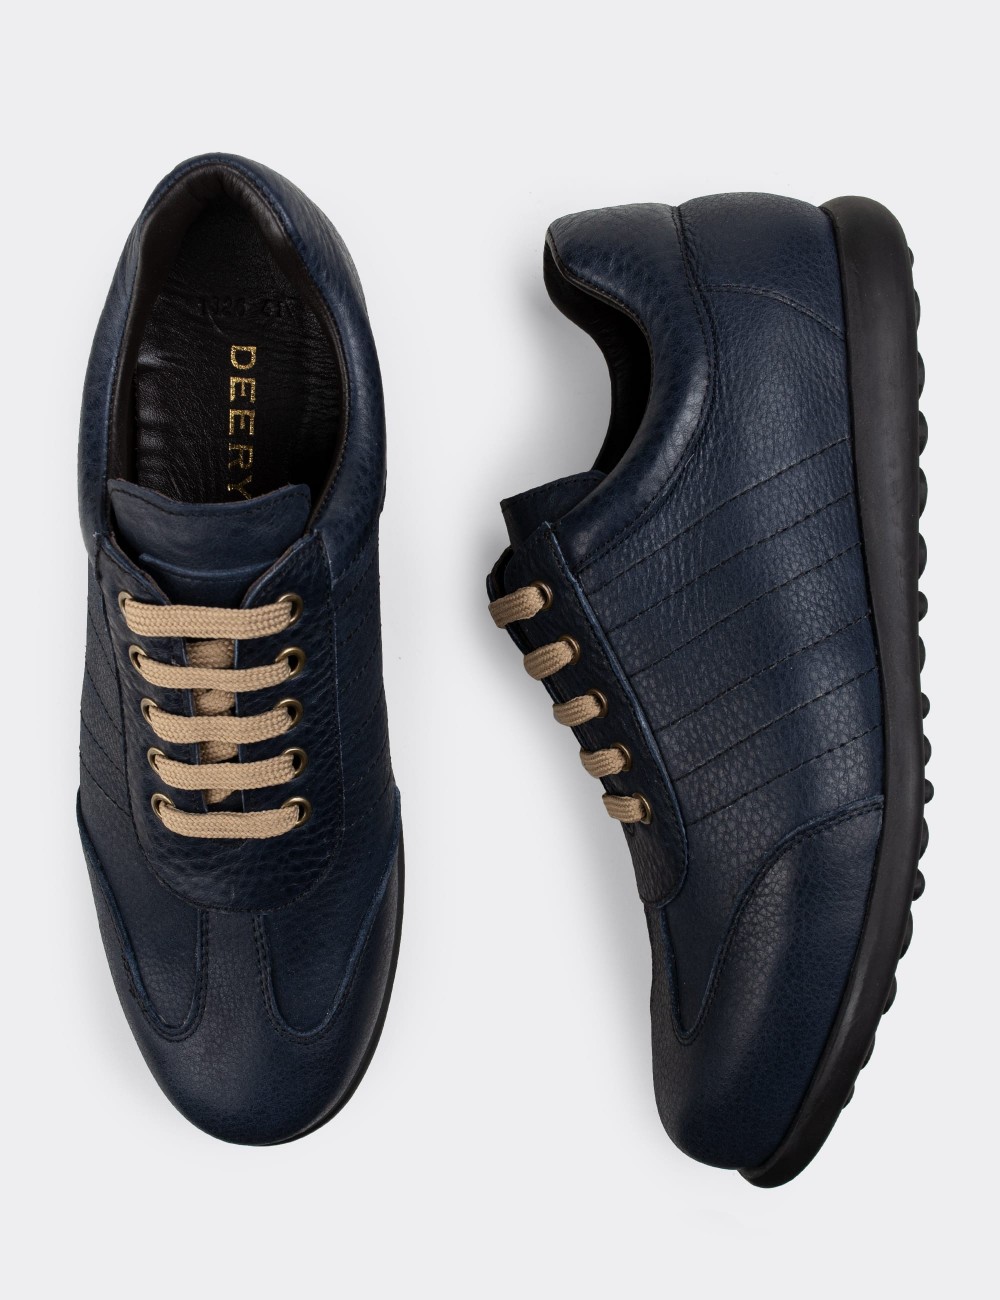 Navy  Leather Lace-up Shoes - 01826MLCVC05